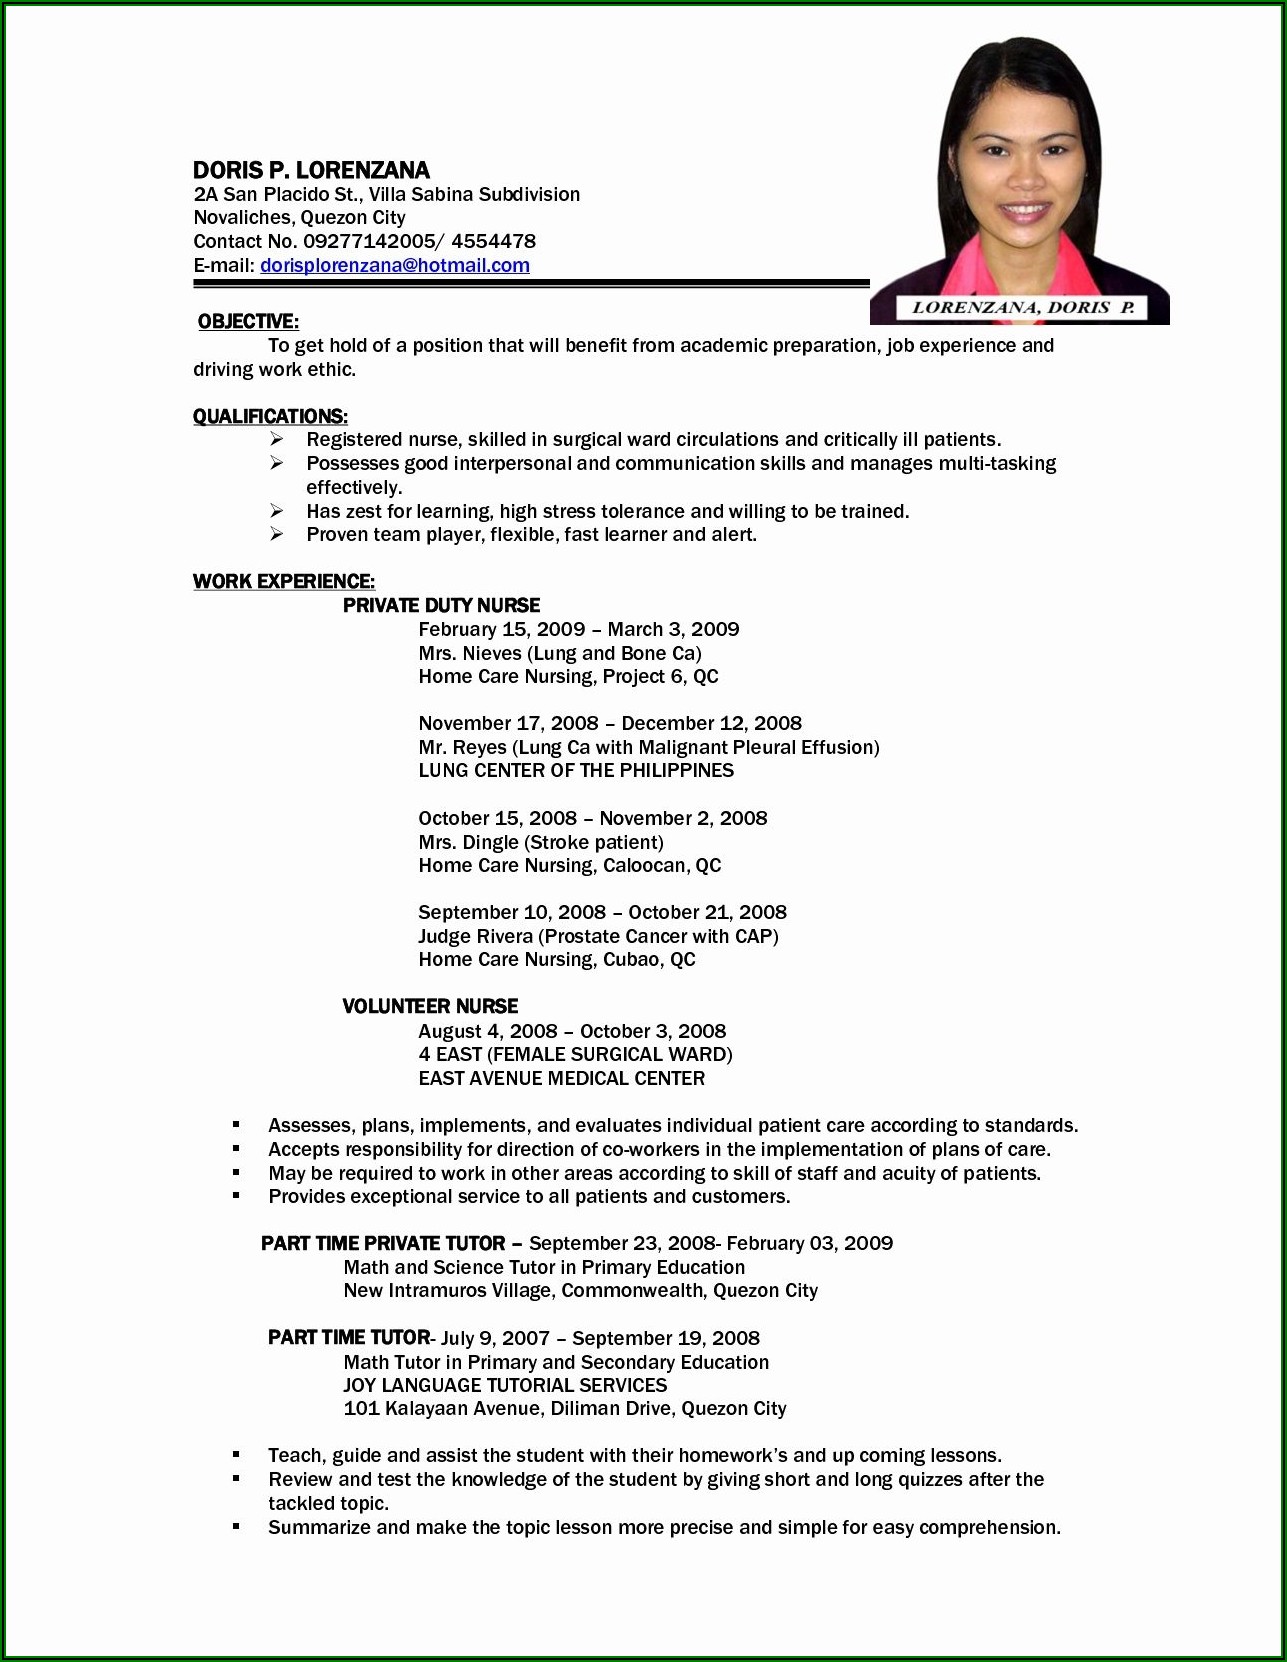 Sample Resume Format For Teachers In The Philippines